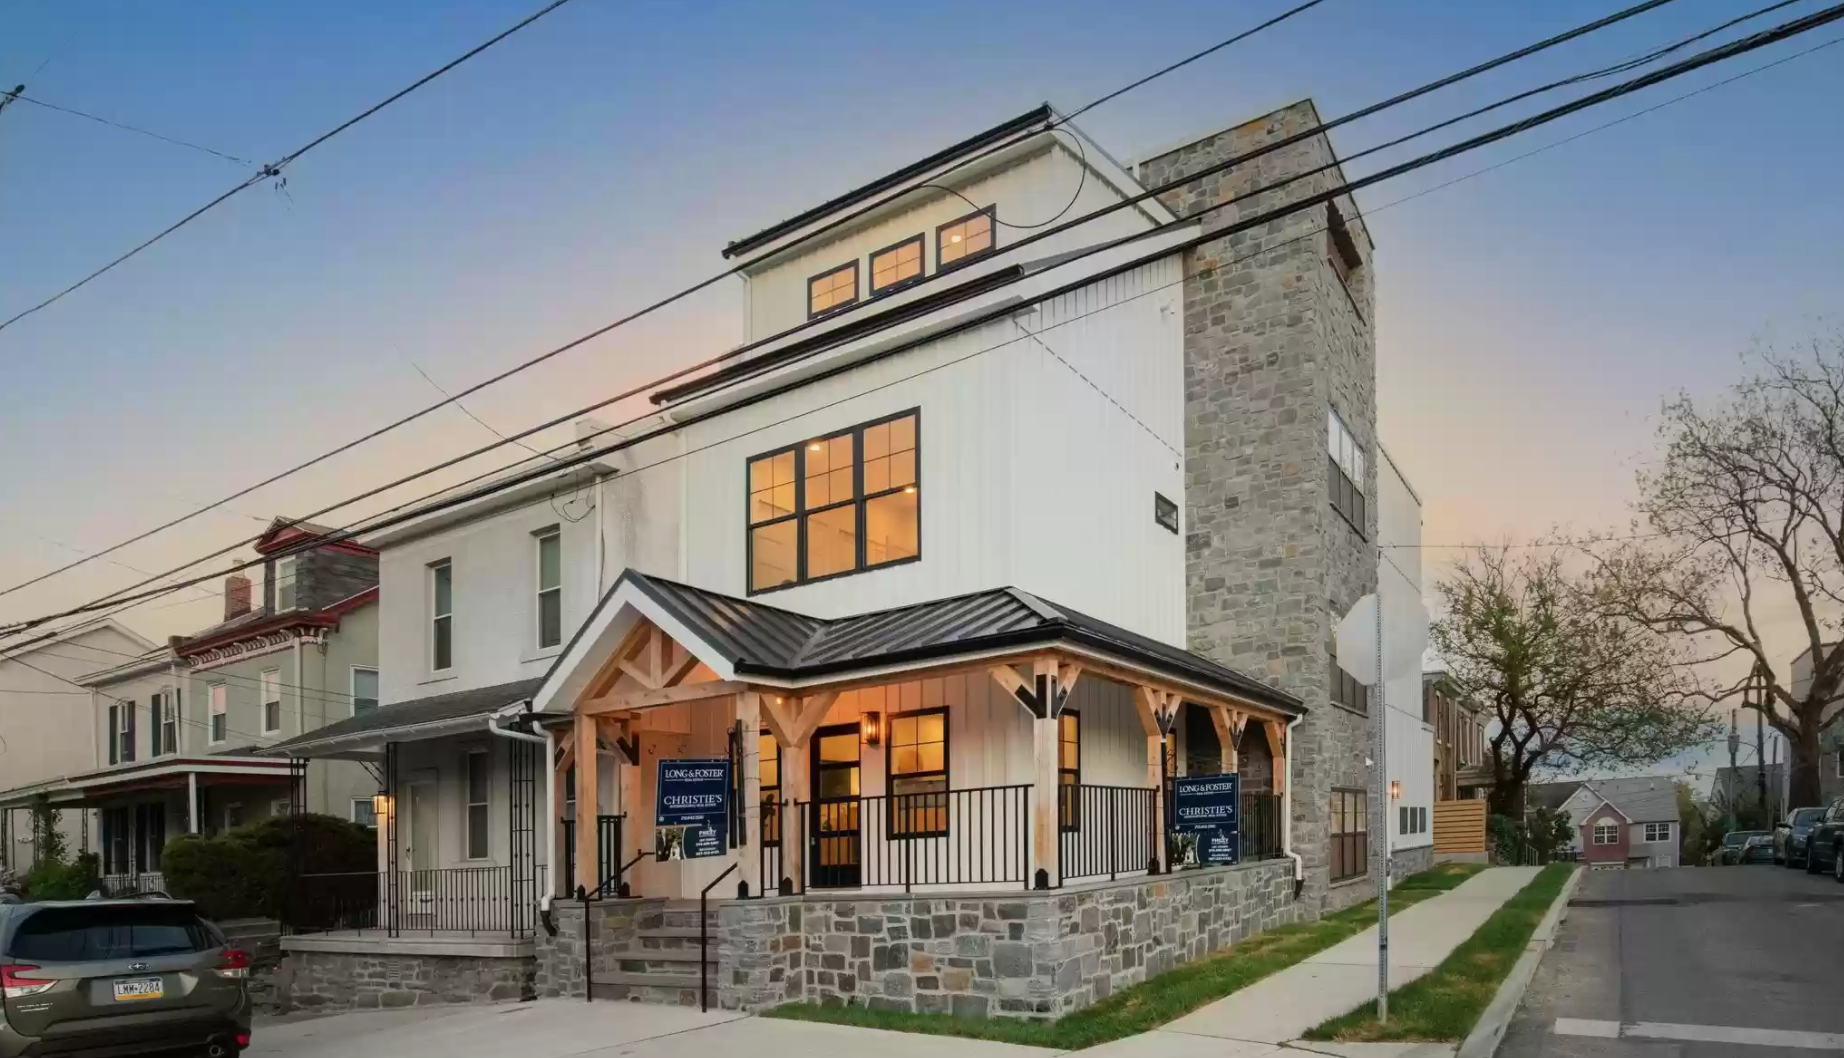 Many real estate investors in the state of Pennsylvania choose to do their projects in larger cities like Pittsburgh and Philadelphia. For this month's featured project, we take a look at a glorious, newly constructed townhome in the city of Philadelphia.